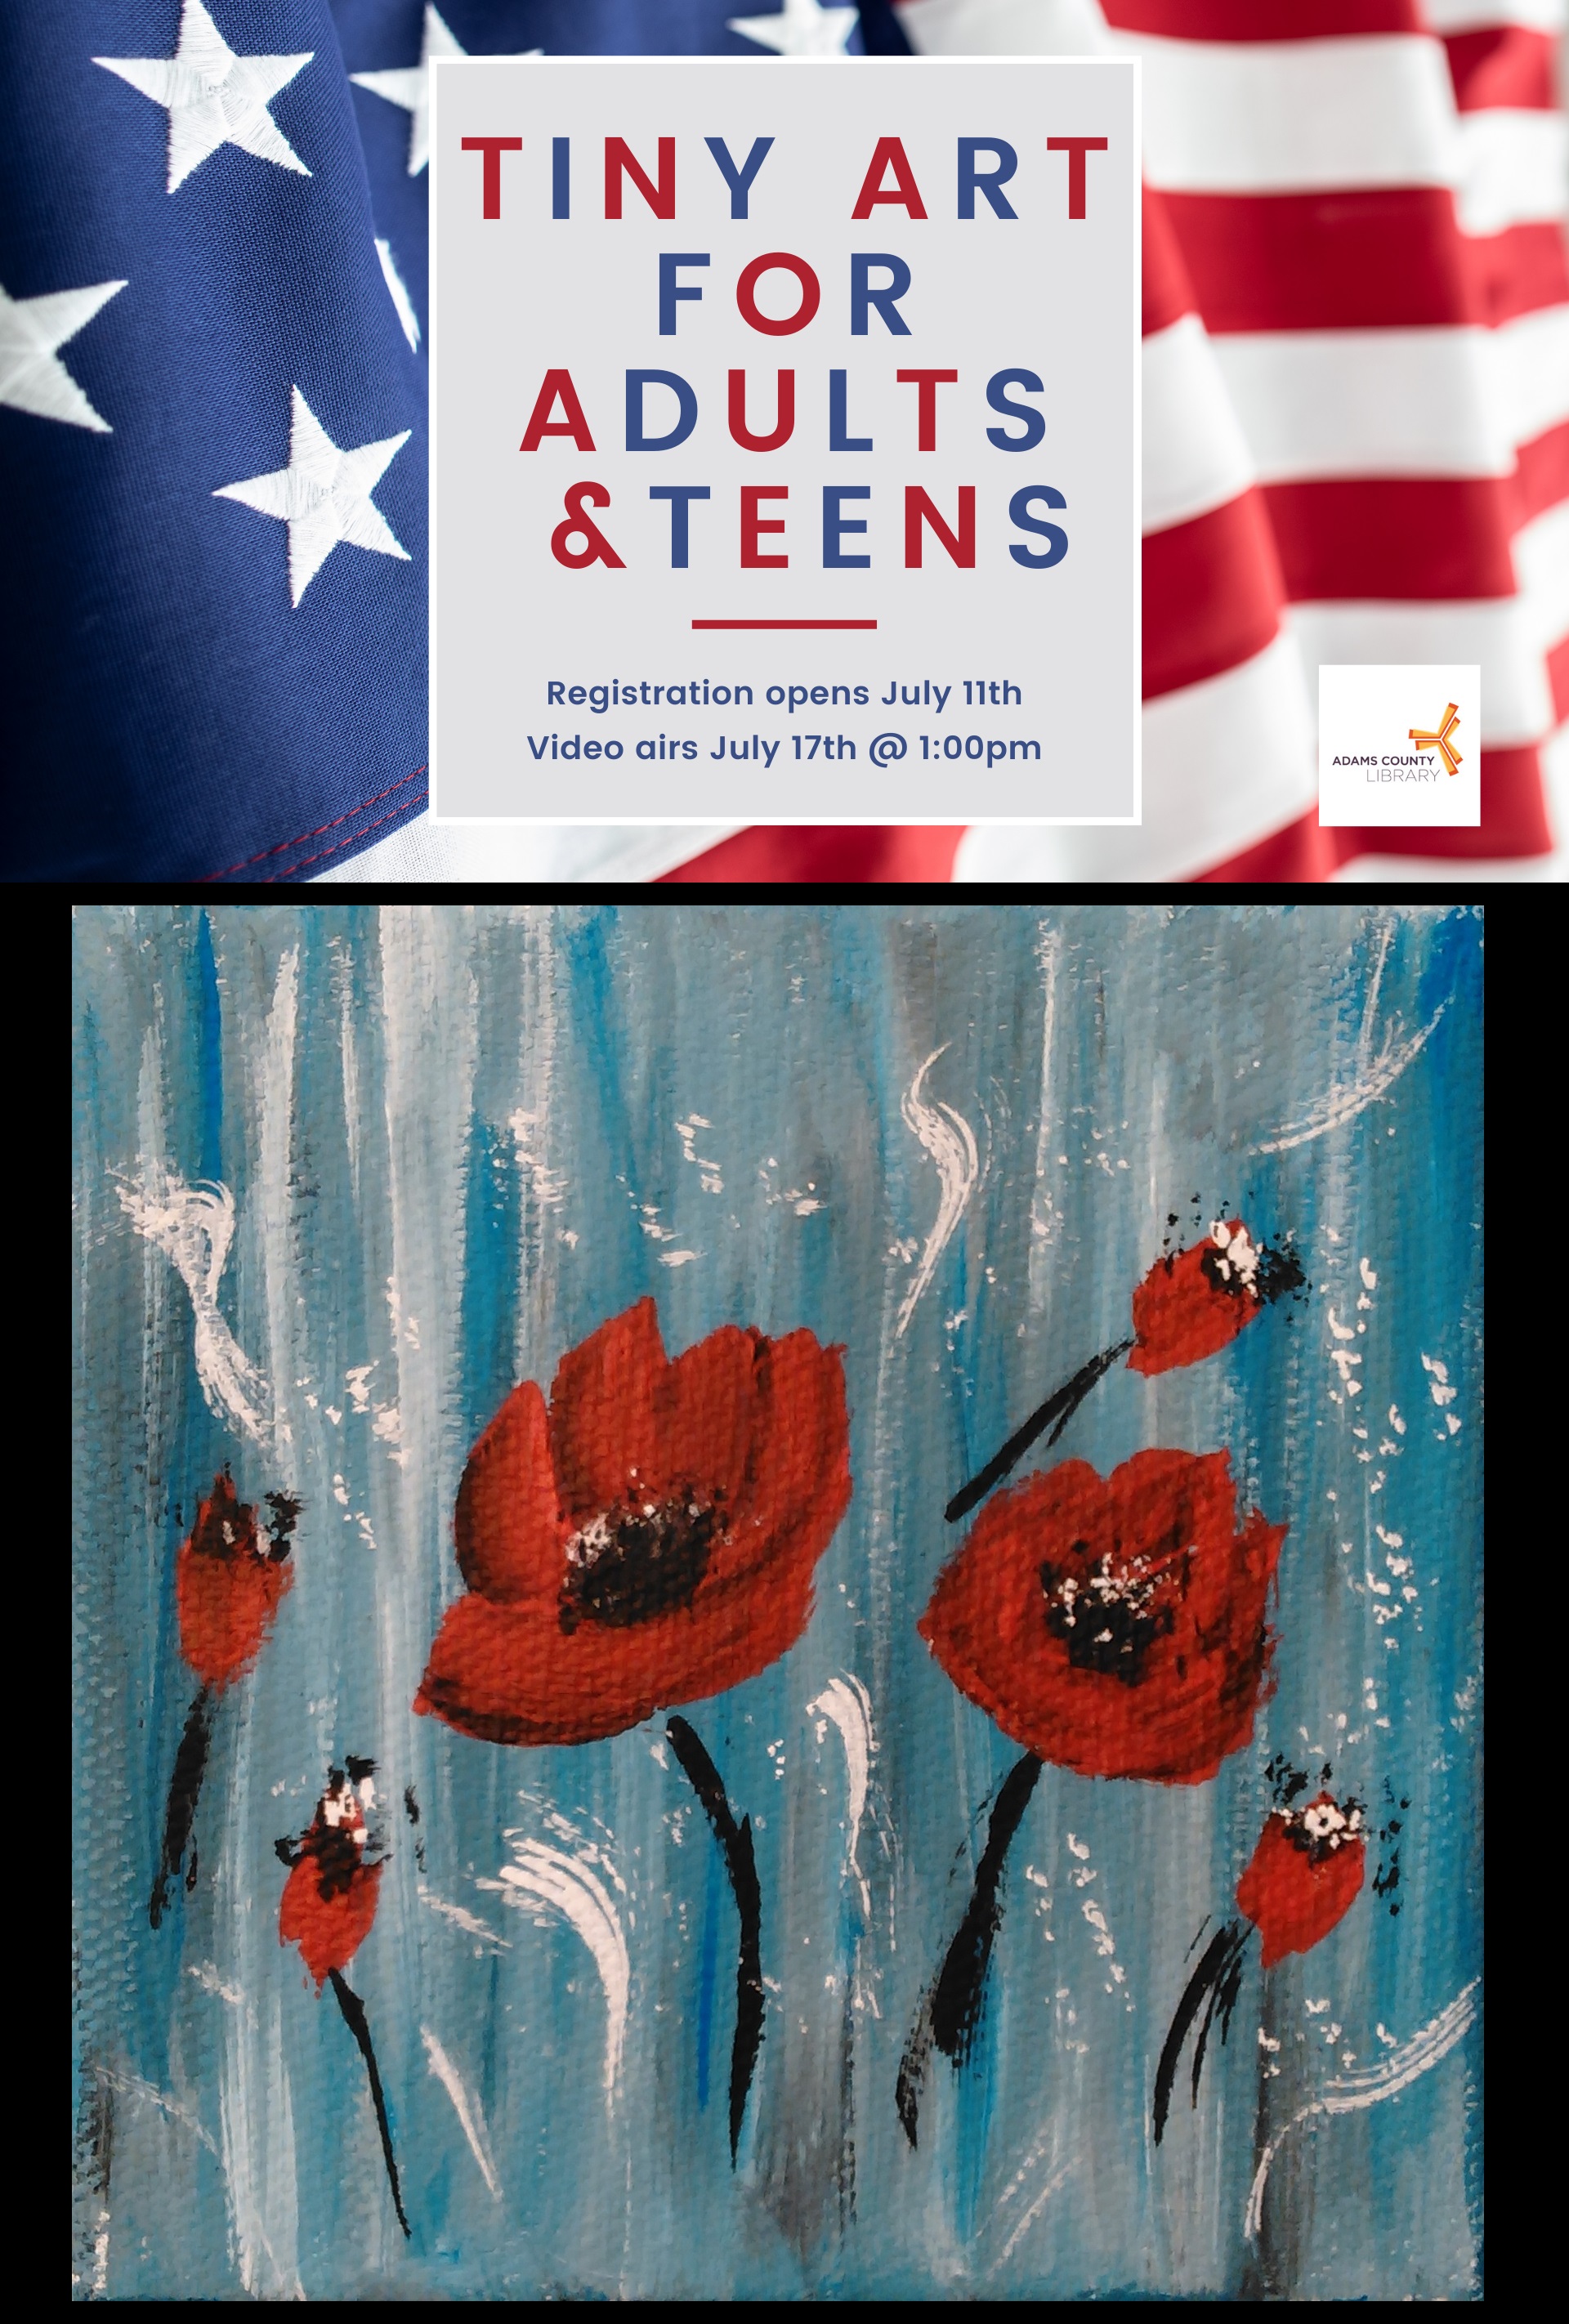 Tiny Art for Teens and Adults. Registration opens July 11th. Video airs July 17th at 1pm.